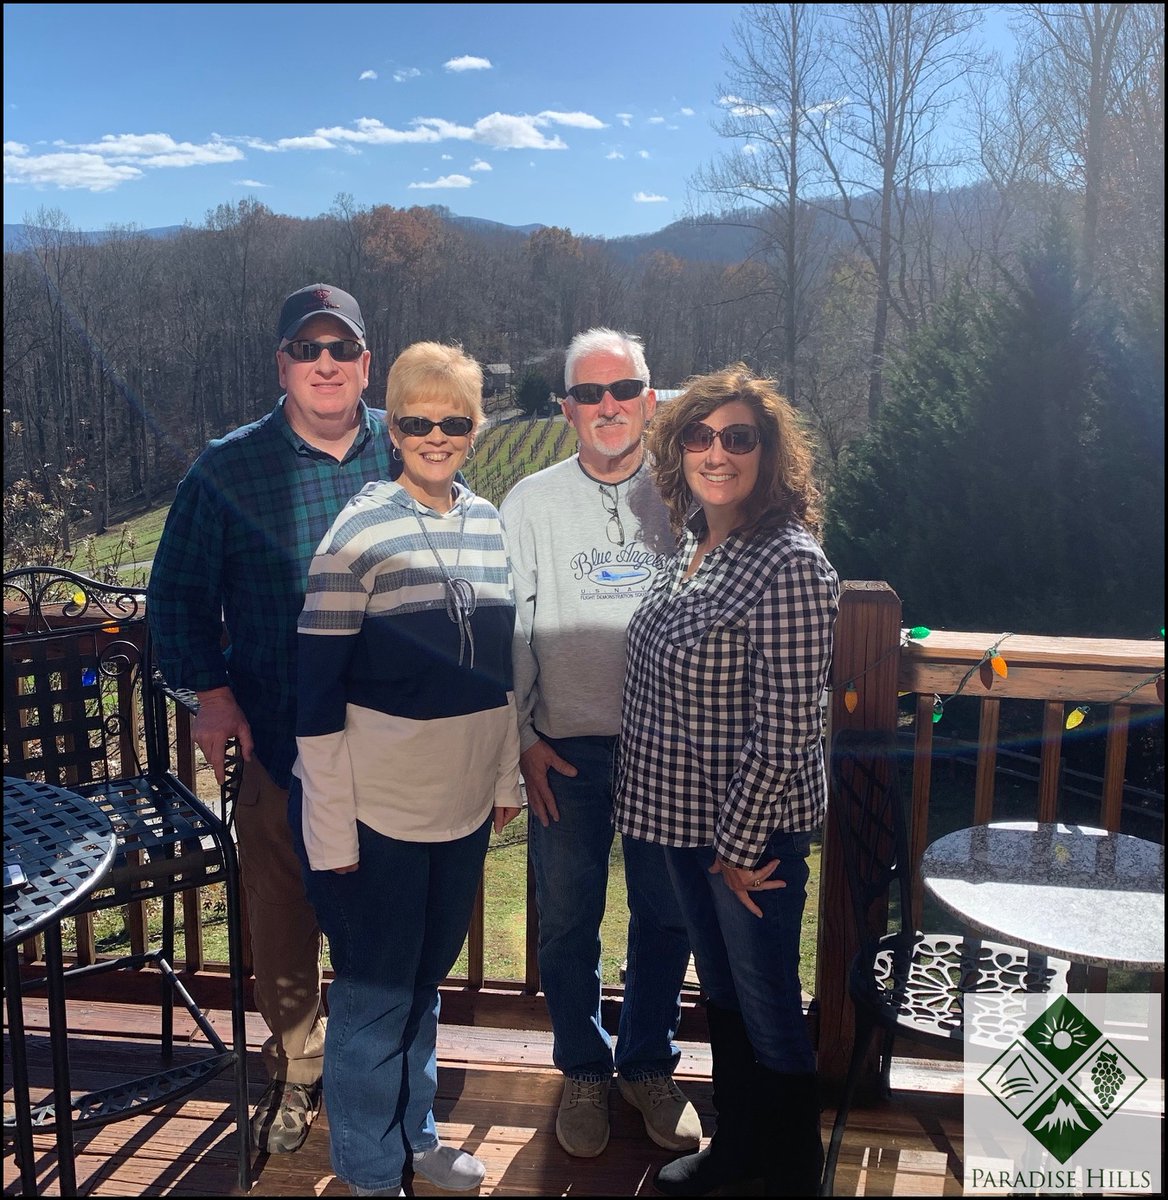 The view from our back deck is so beautiful it is the perfect place for a photo op. Drop up a like below if you love enjoying your wine on the back deck. #paradisehillsfun #paradisehillsstrong #paradisehillsmemories #wine #wineries #northgeorgiawineries #opengeorgiawine